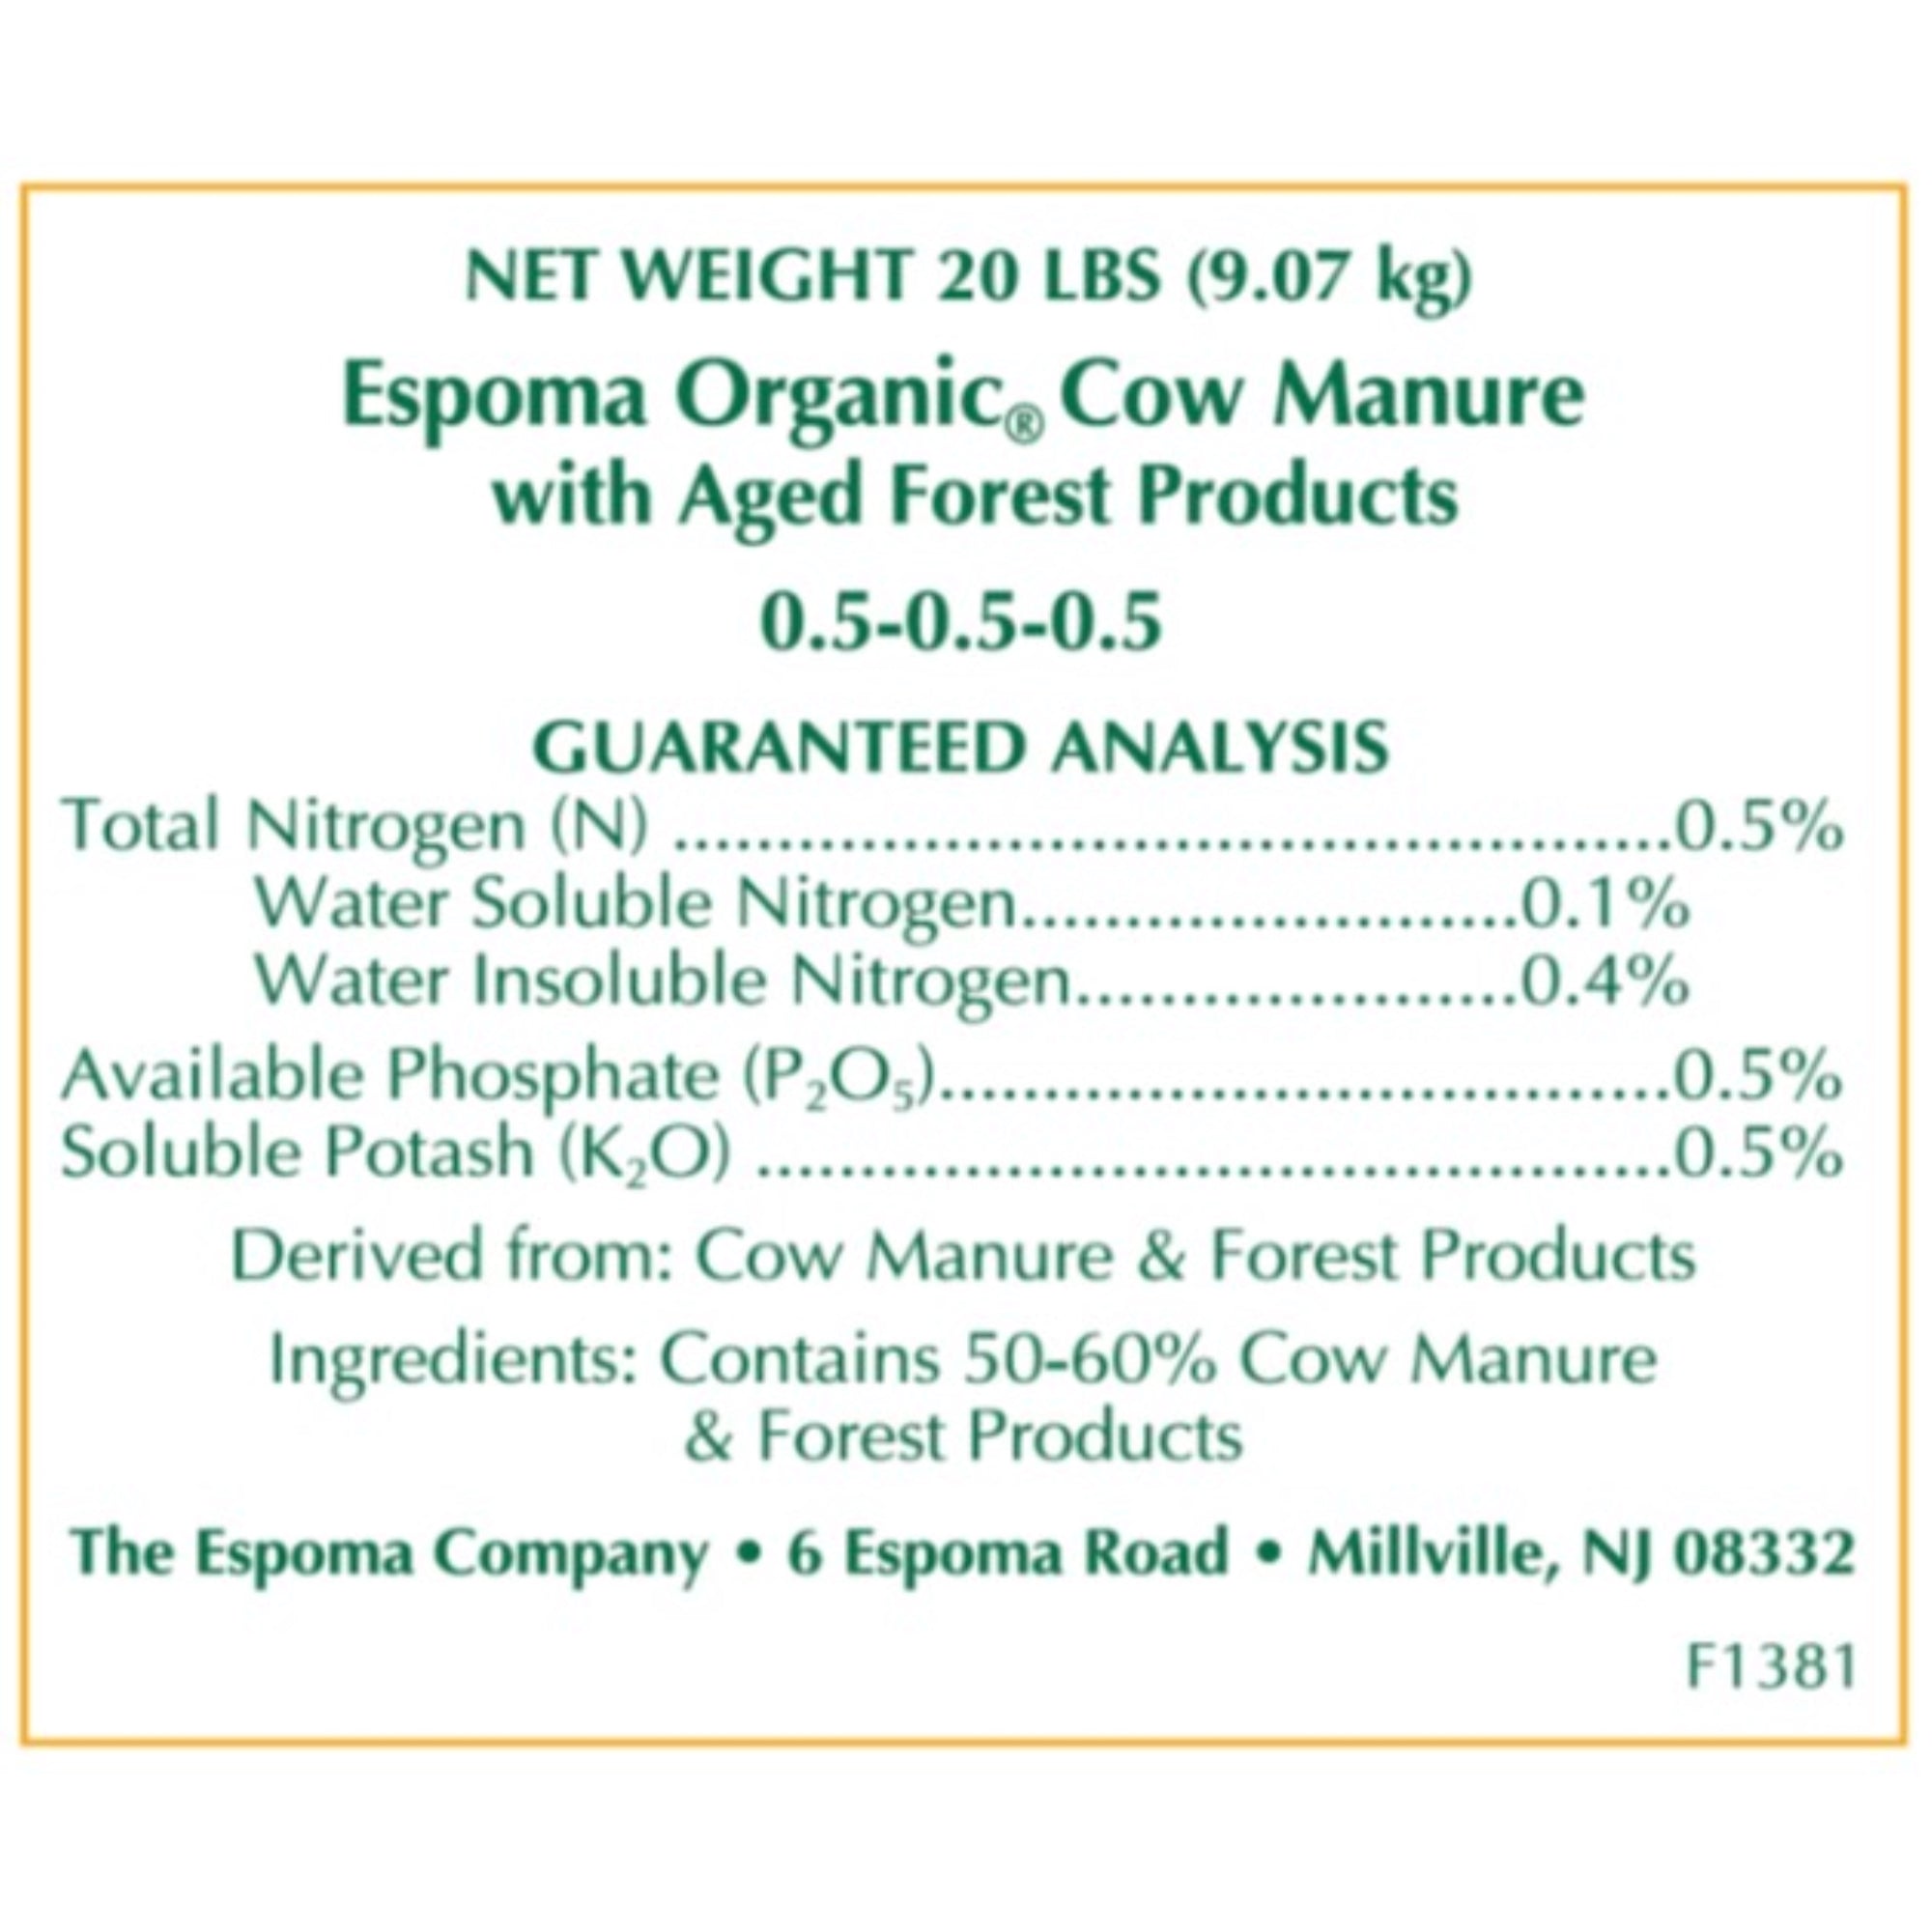 Espoma Organic Cow Manure with Aged Forest Products, All-Natural and Organic for Organic Gardening, 1 CF Bag